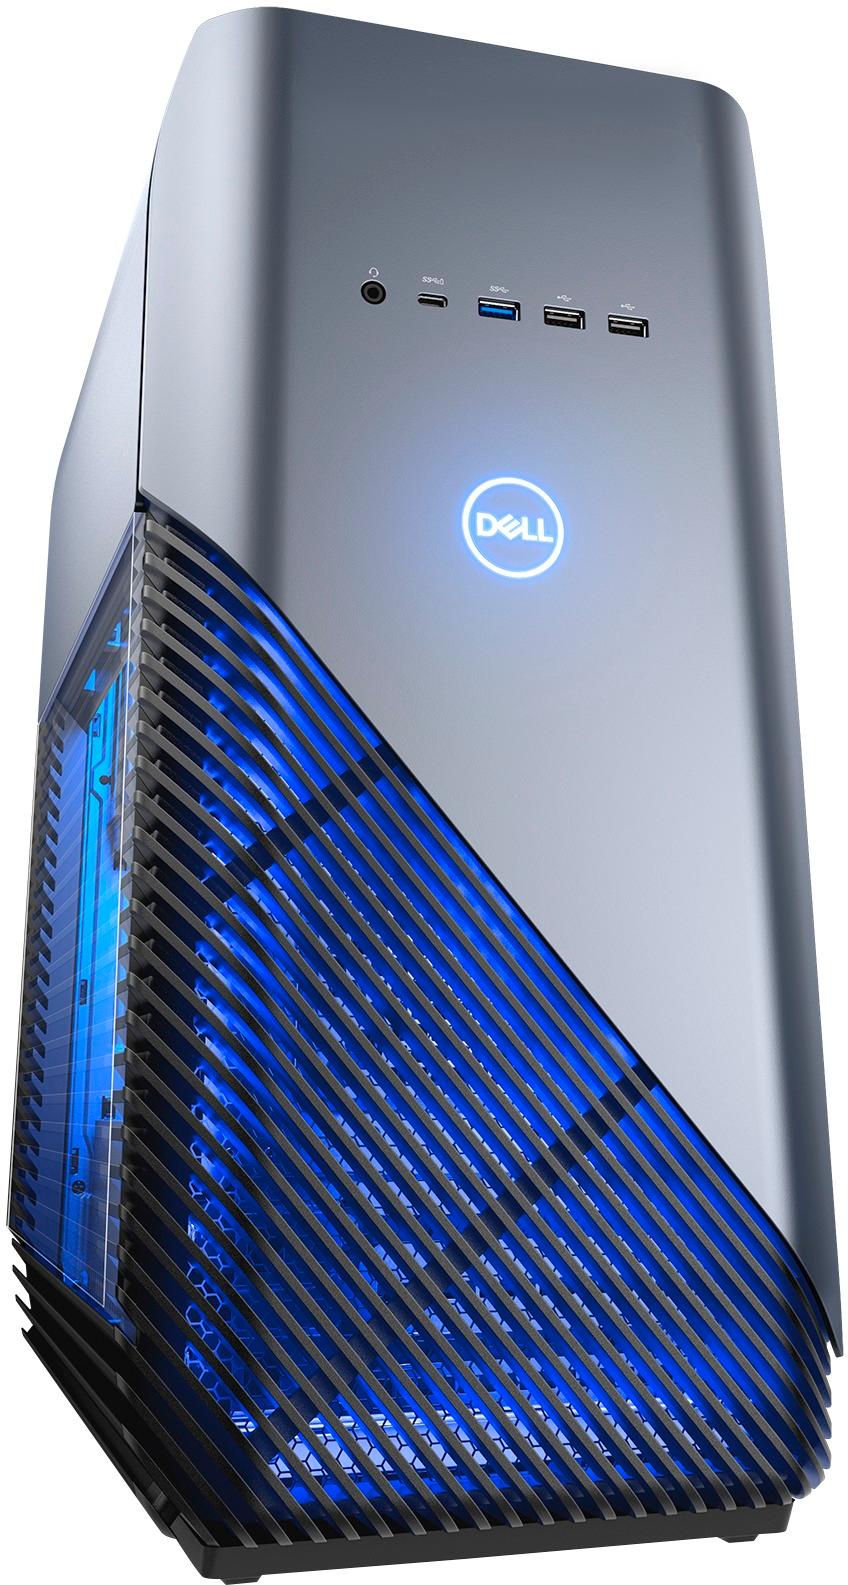 Best Buy: Dell Inspiron Gaming Desktop- Intel Core i7 8GB Memory NVIDIA  GeForce GTX 1060 128GB Solid State Drive + 1TB Hard Drive Recon Blue  I5675-7806BLU-PUS